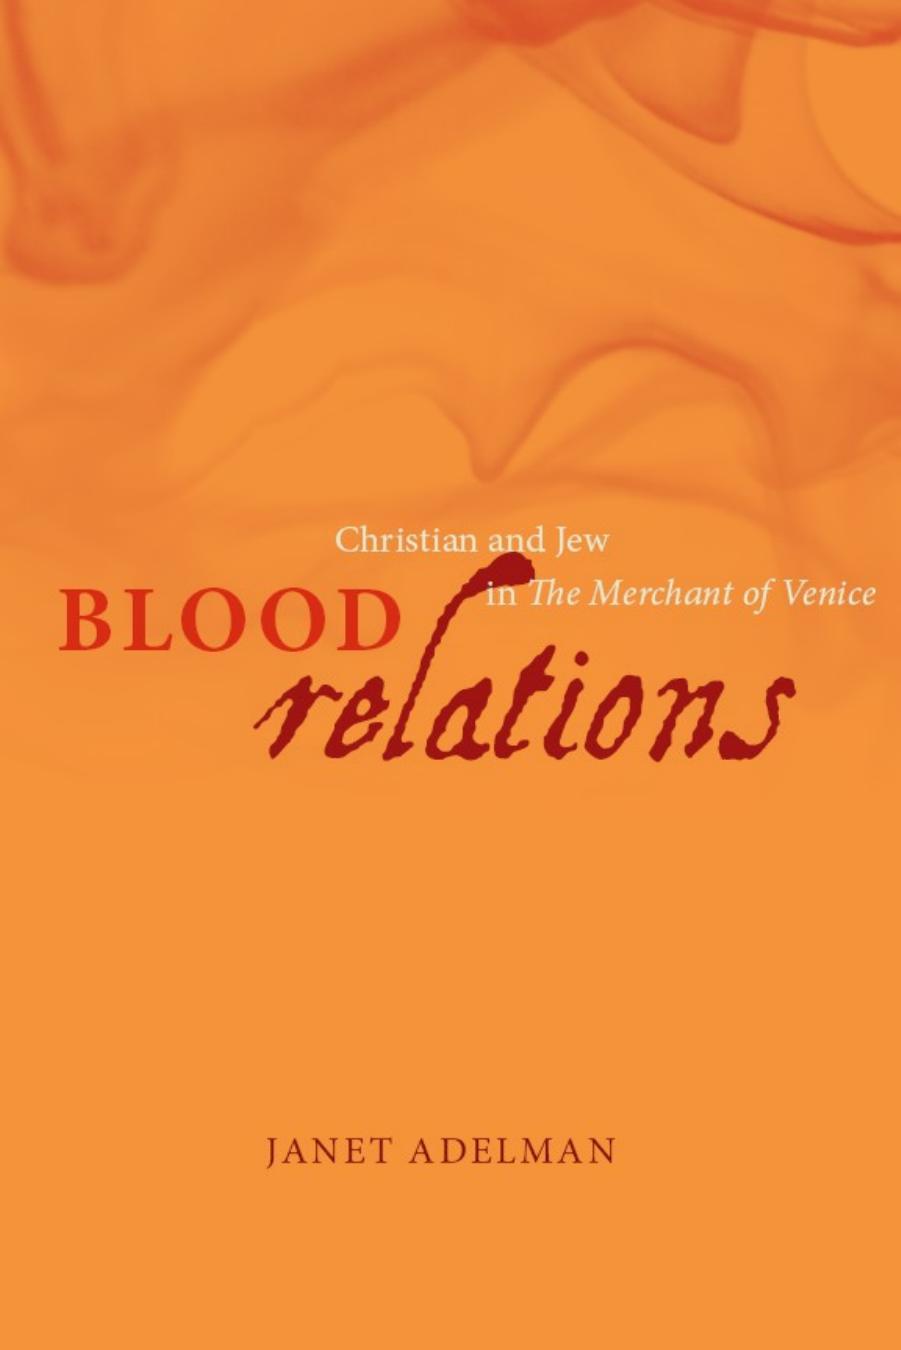 Blood Relations: Christian and Jew in the Merchant of Venice